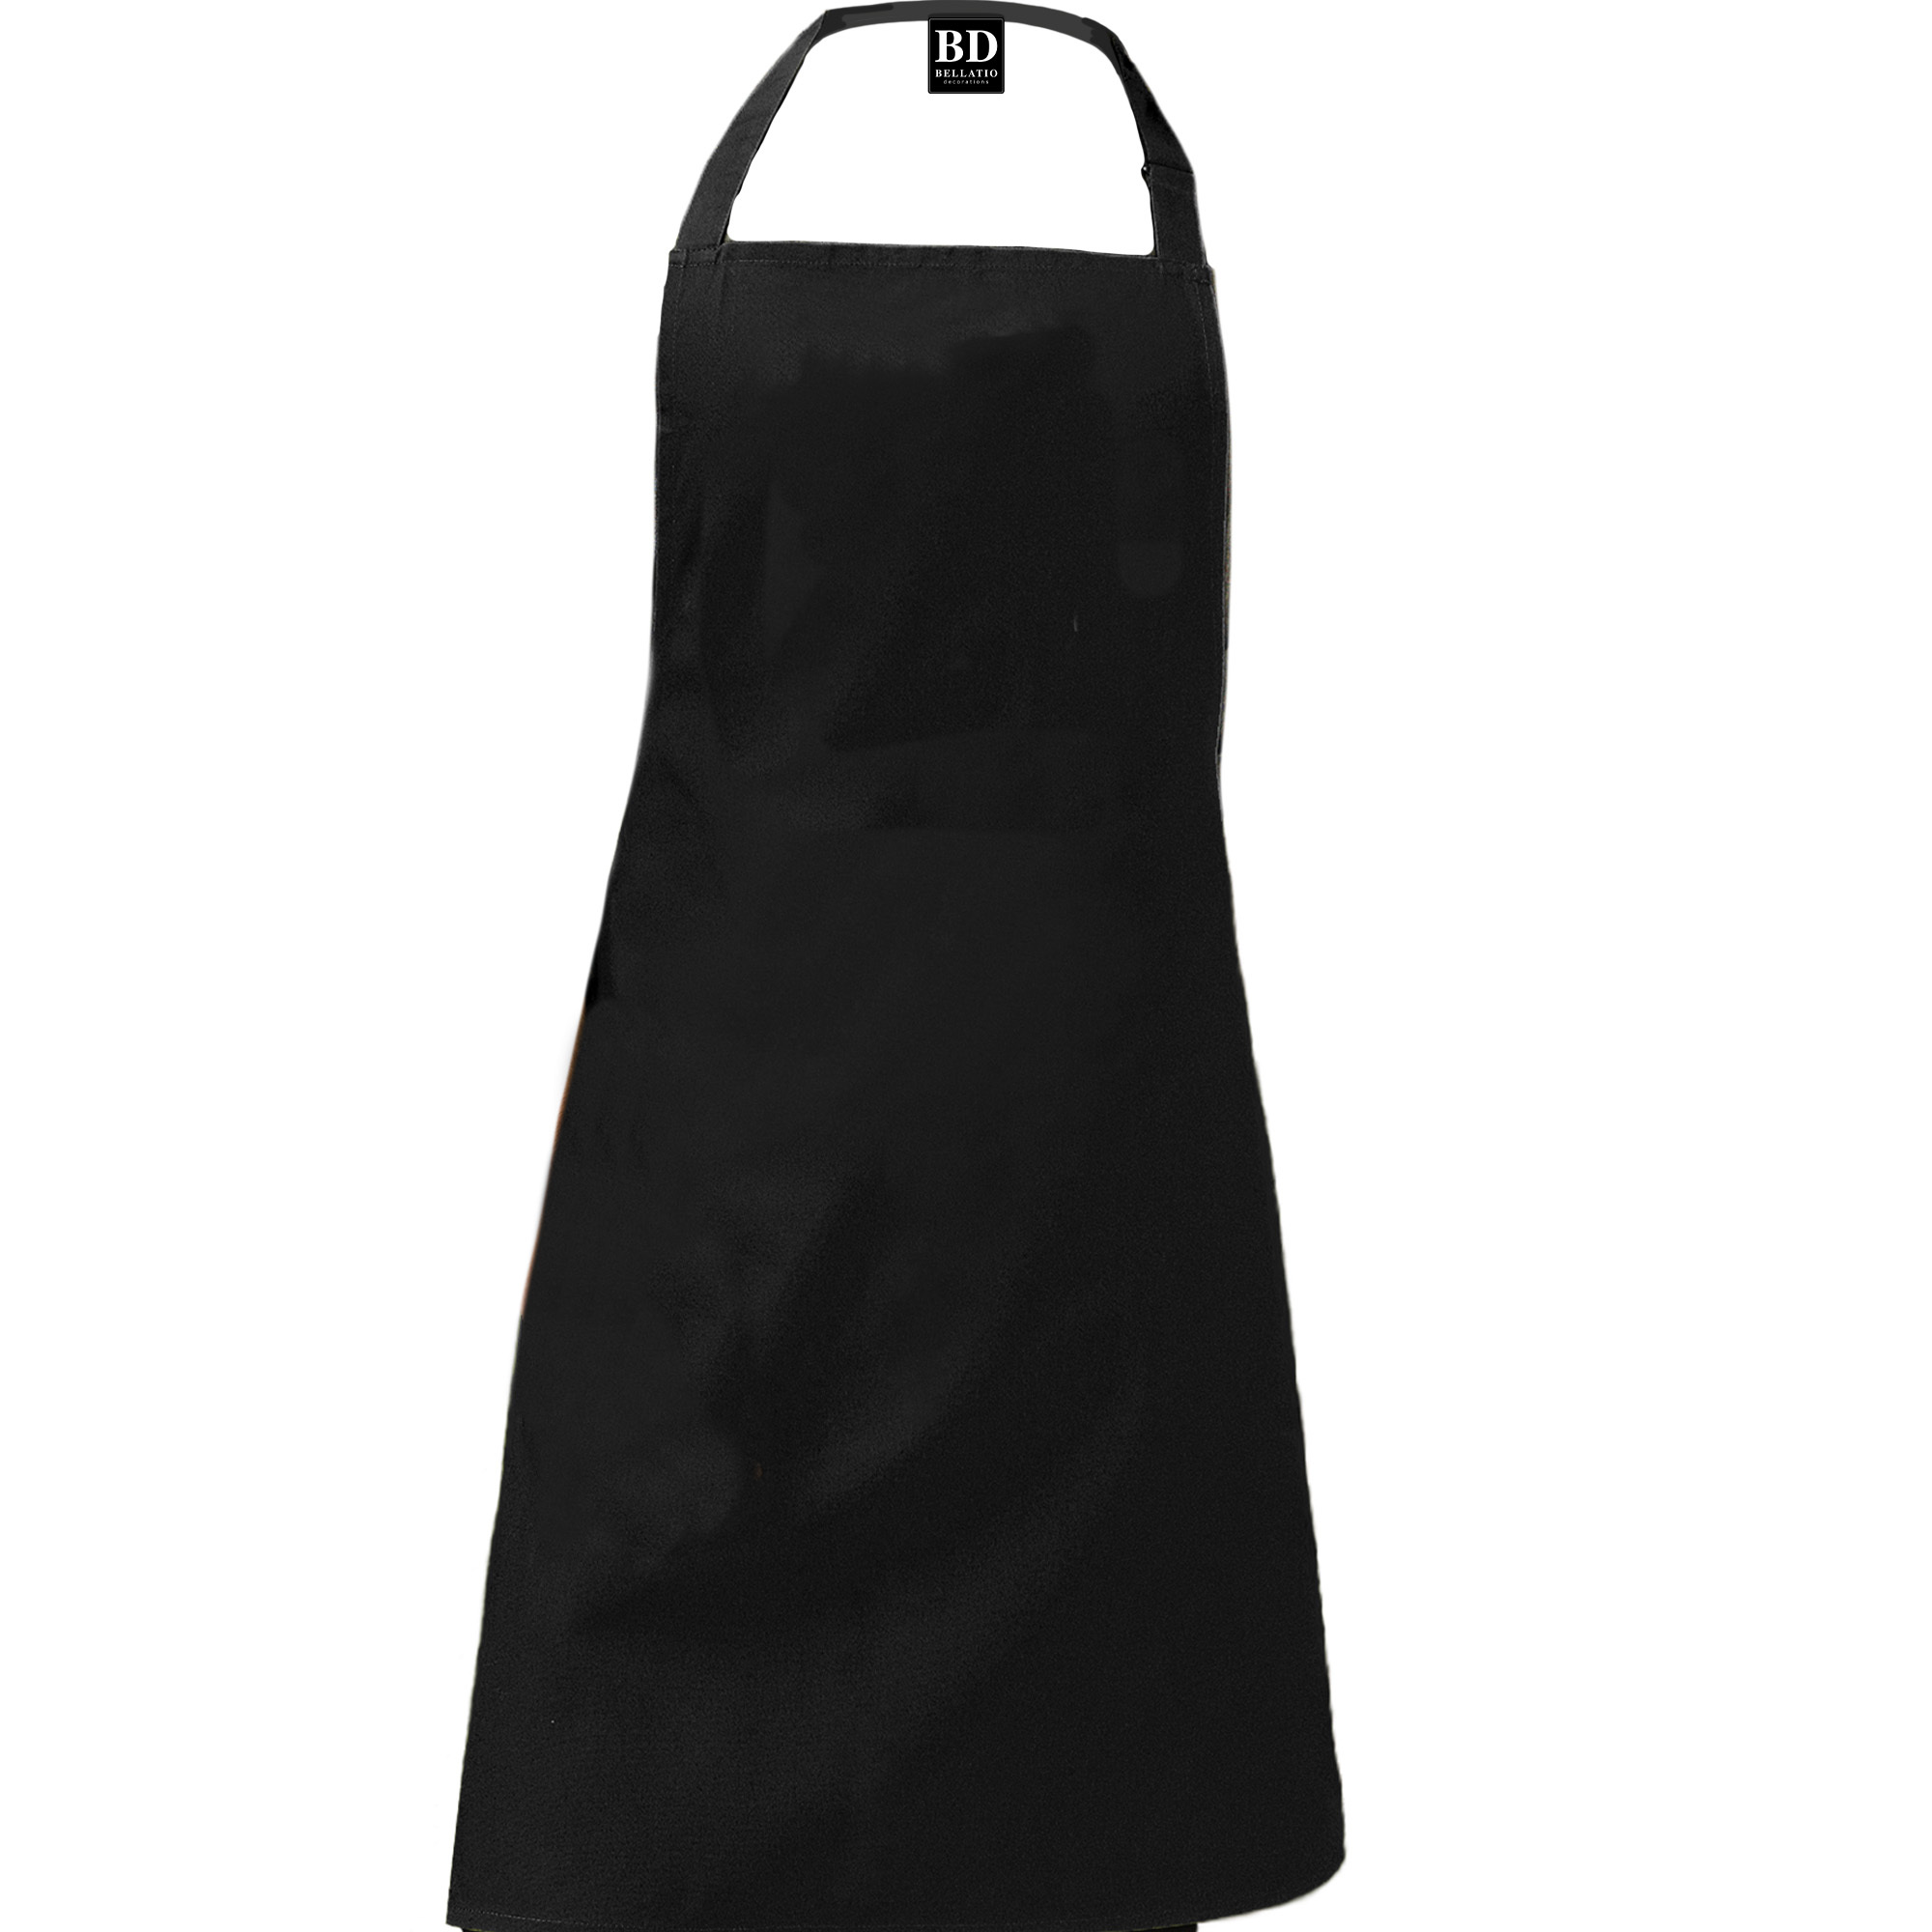 Queen of the kitchen Rinke apron black for women